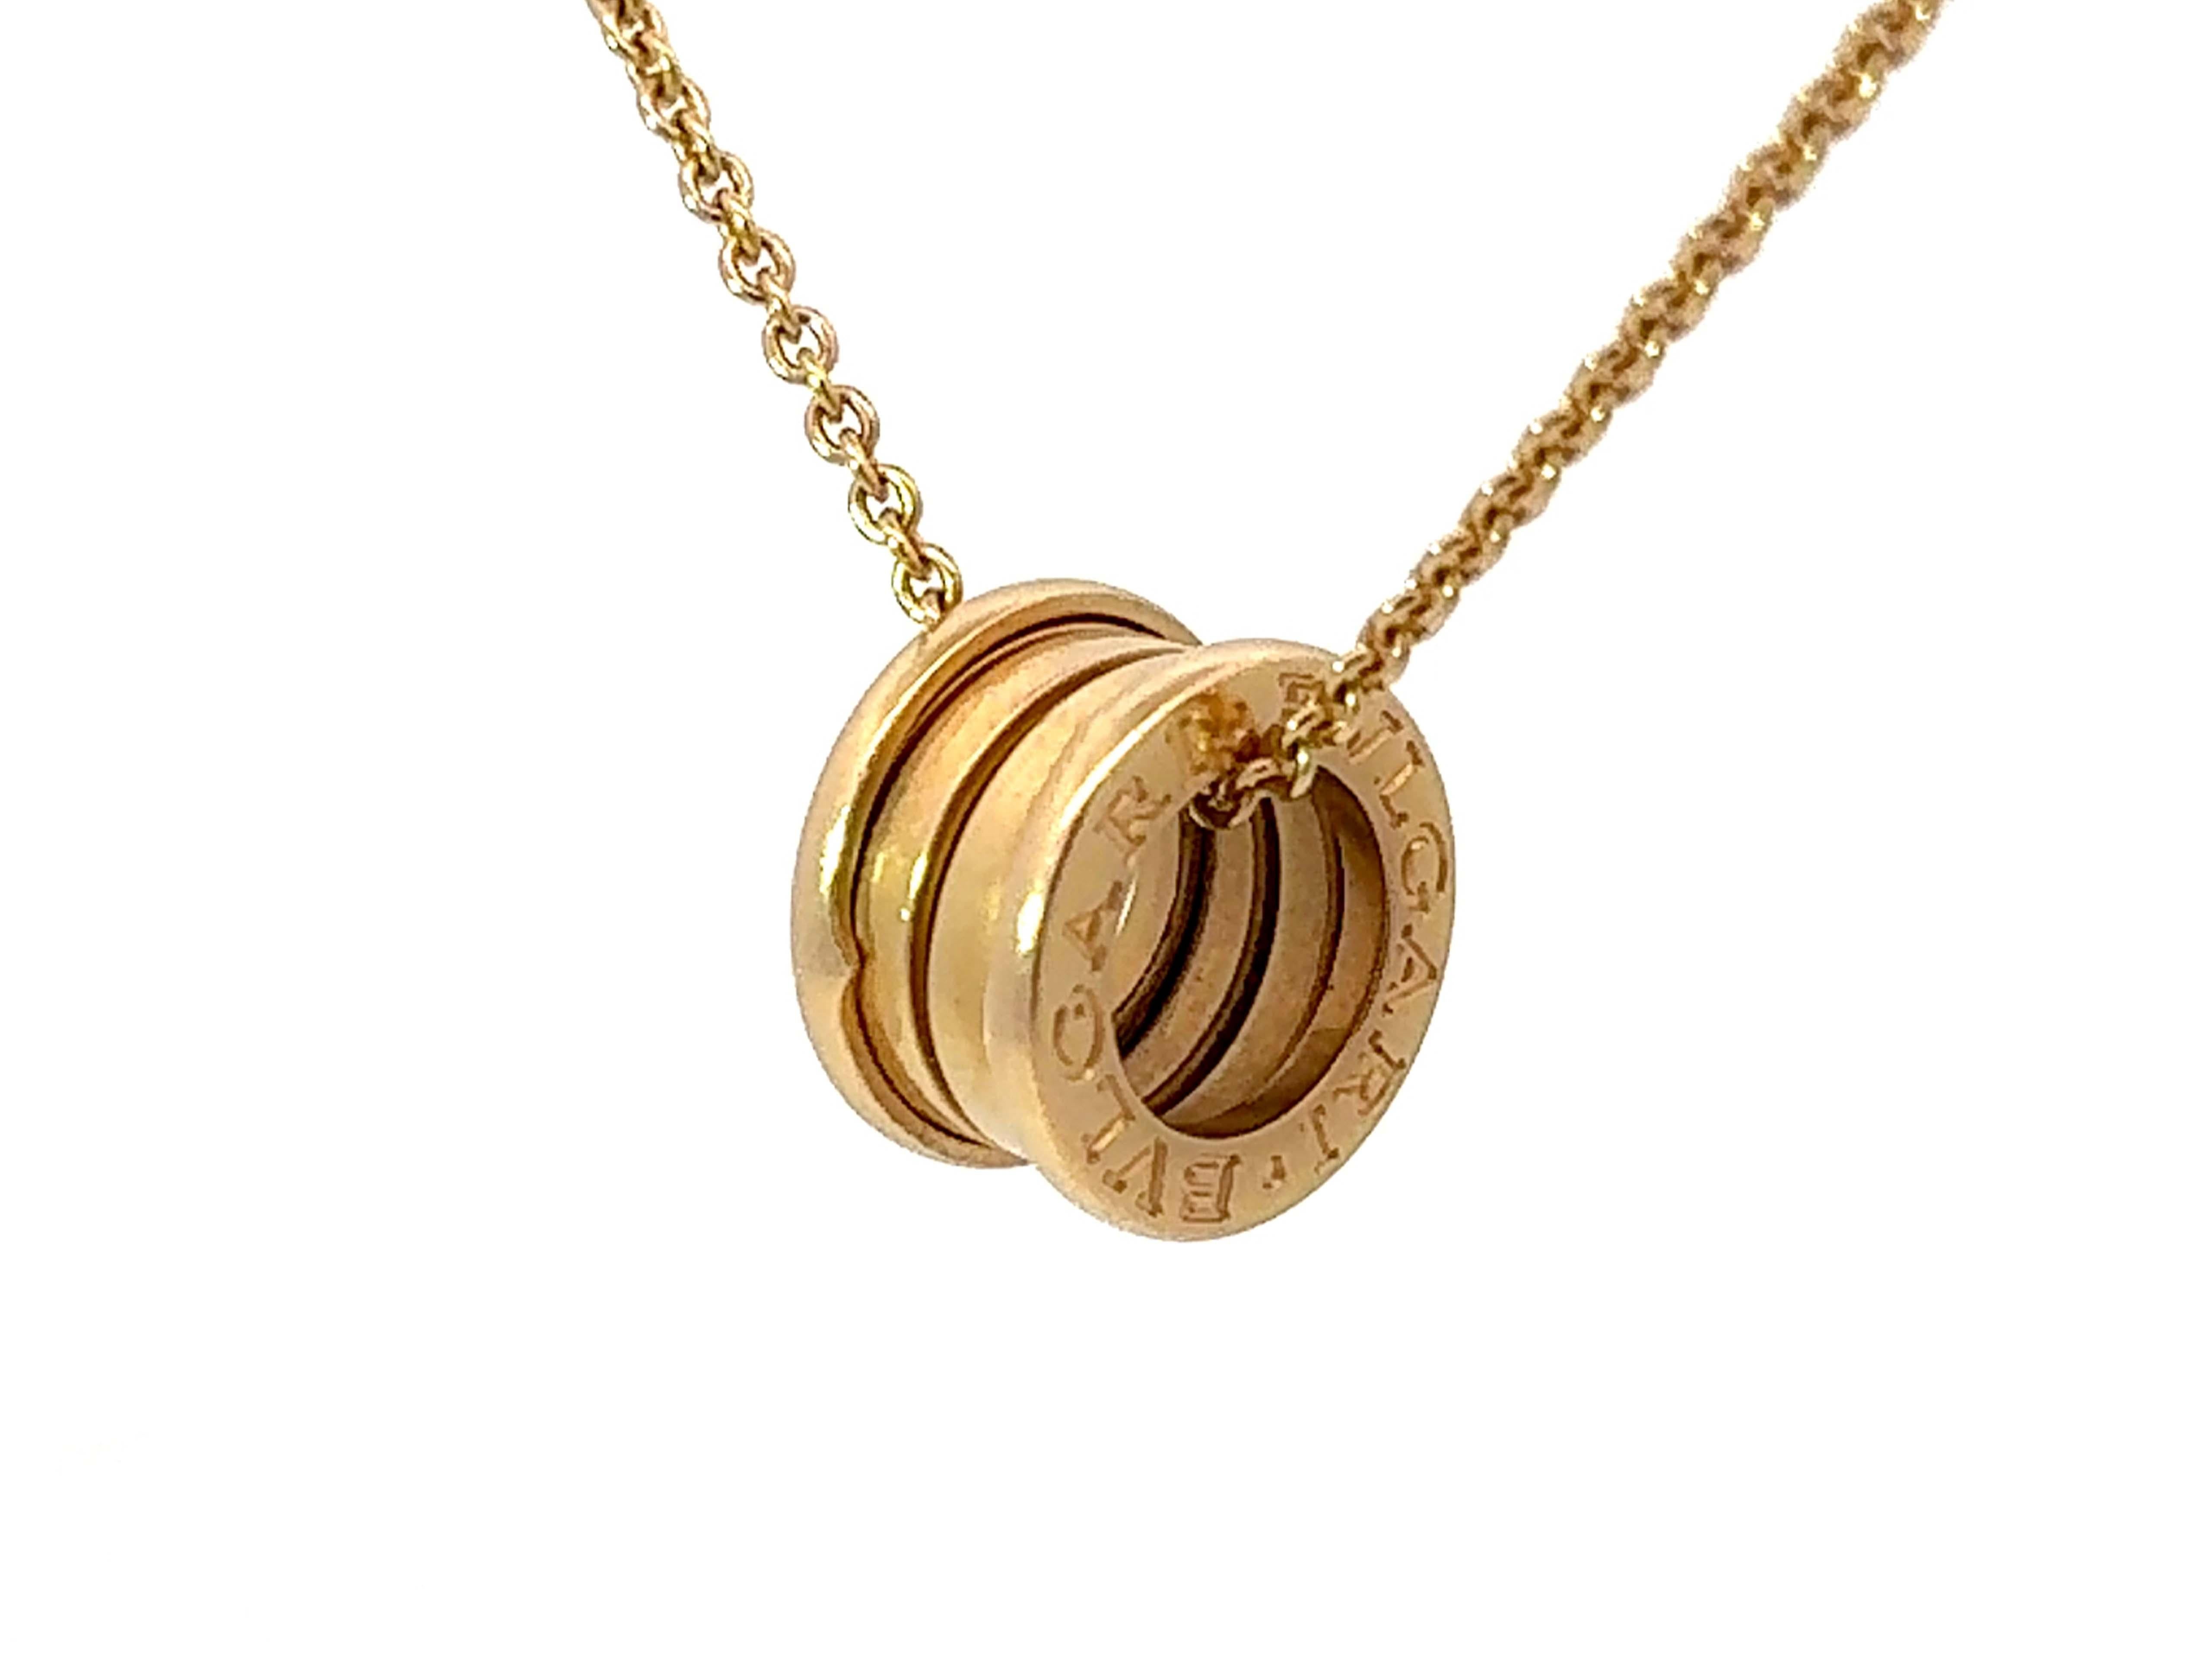 BVLGARI B.ZERO1 Necklace 18k Yellow Gold With Box and Papers In Excellent Condition For Sale In Honolulu, HI